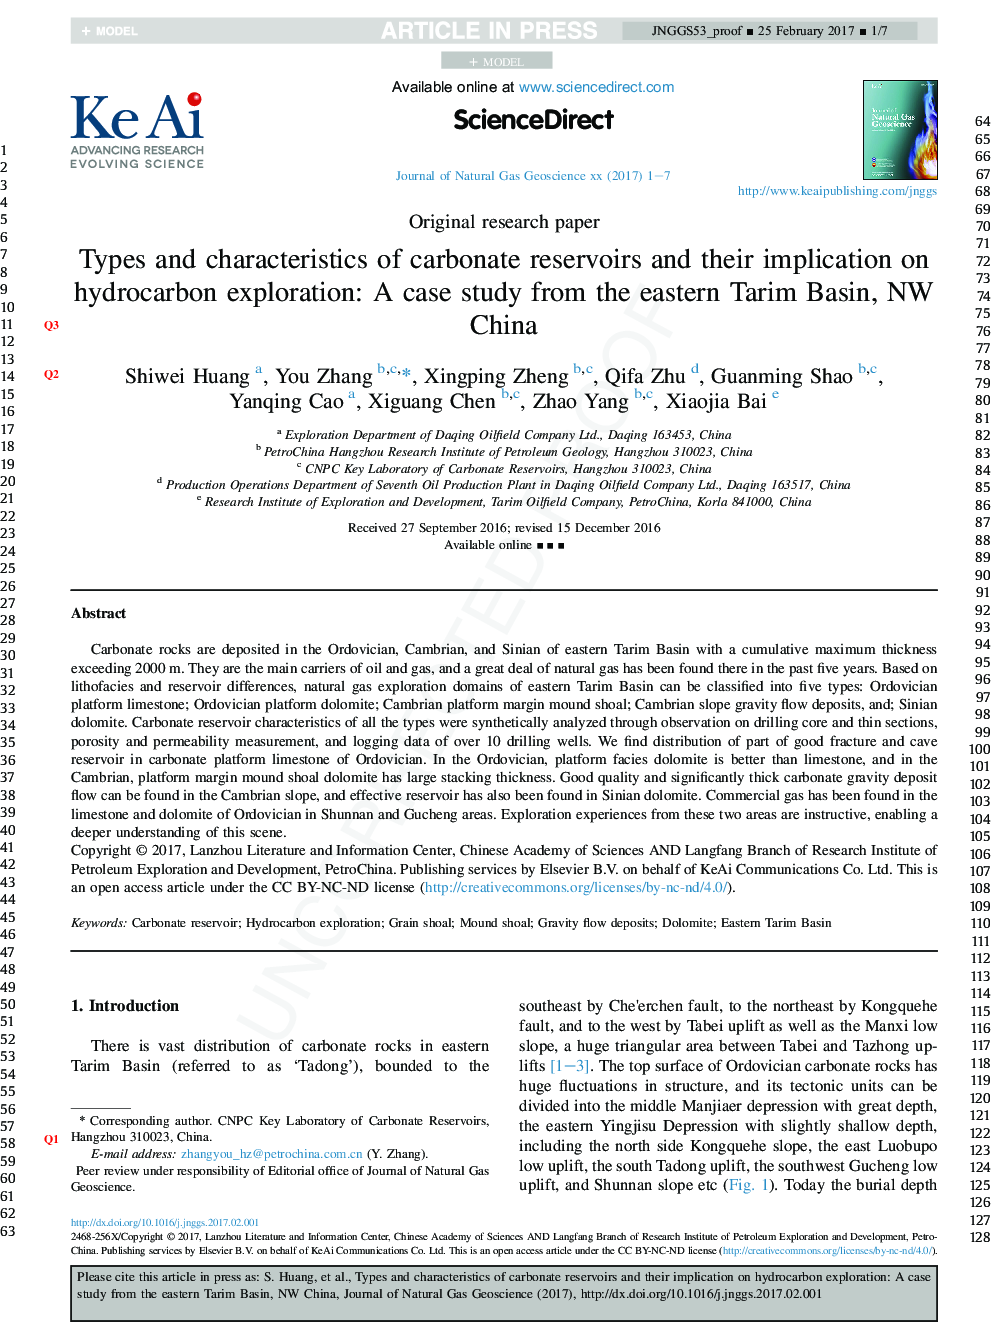 Types and characteristics of carbonate reservoirs and their implication on hydrocarbon exploration: A case study from the eastern Tarim Basin, NW China